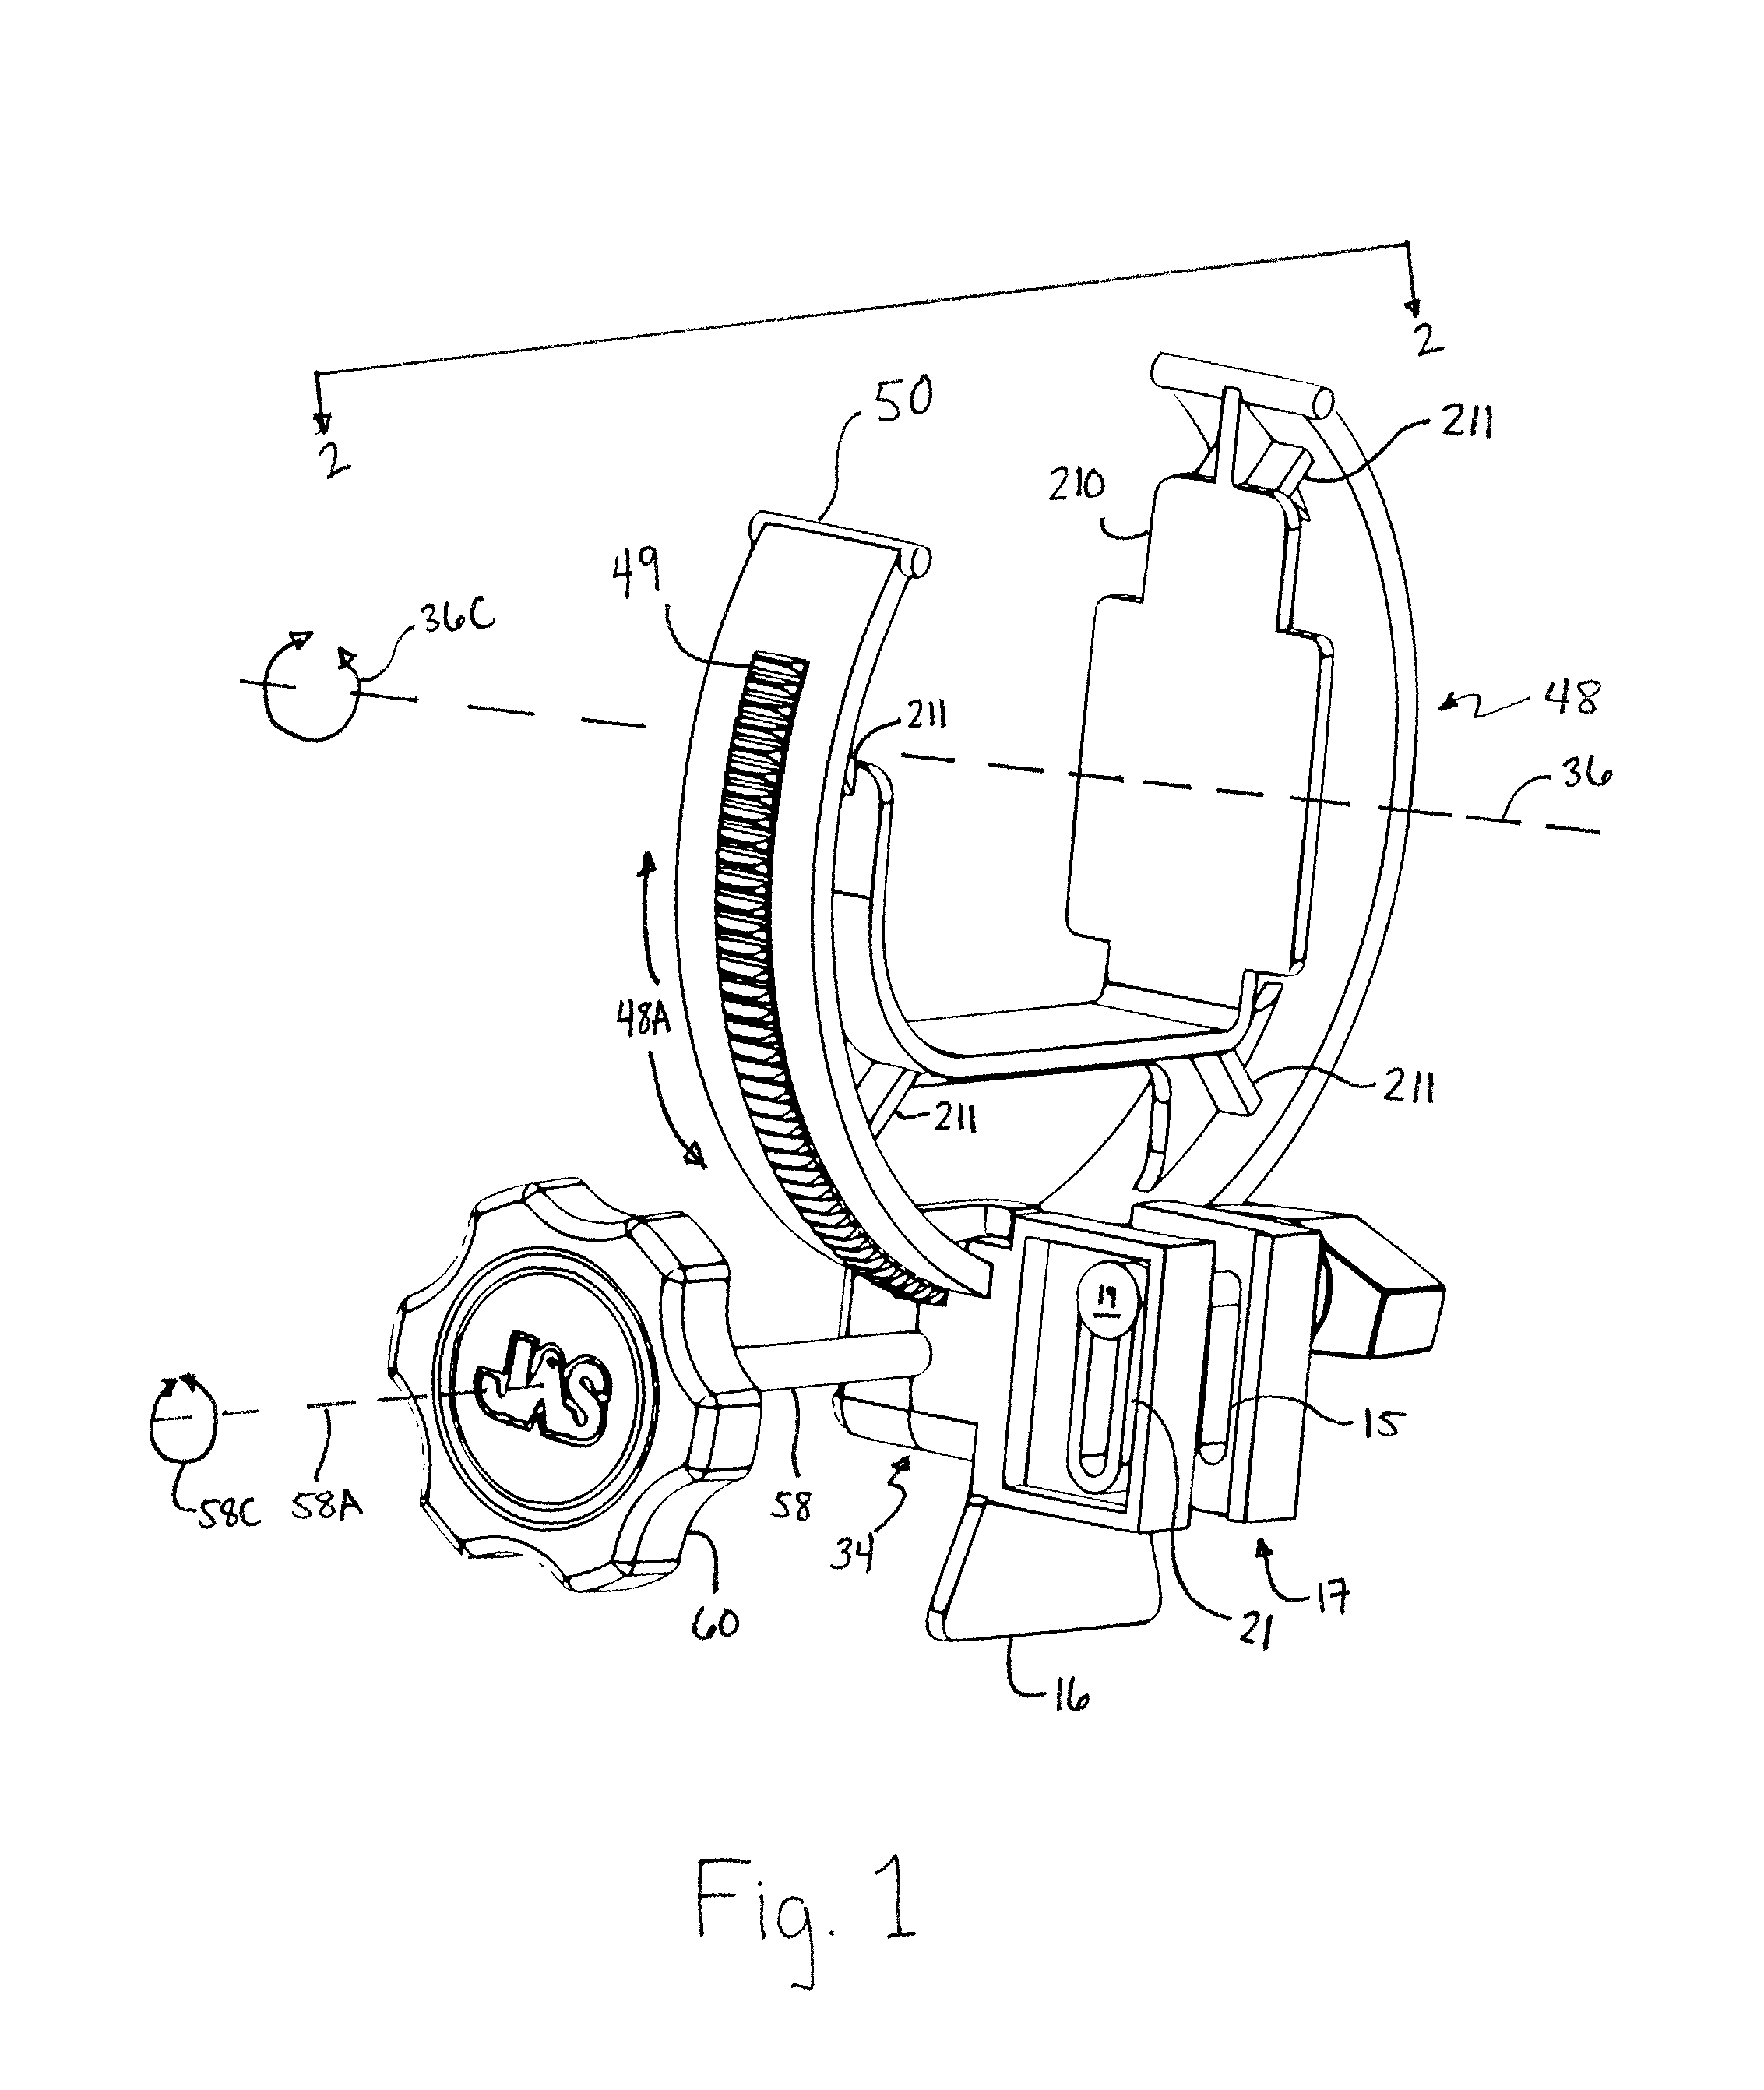 Orthosis apparatus and method of using an orthosis apparatus